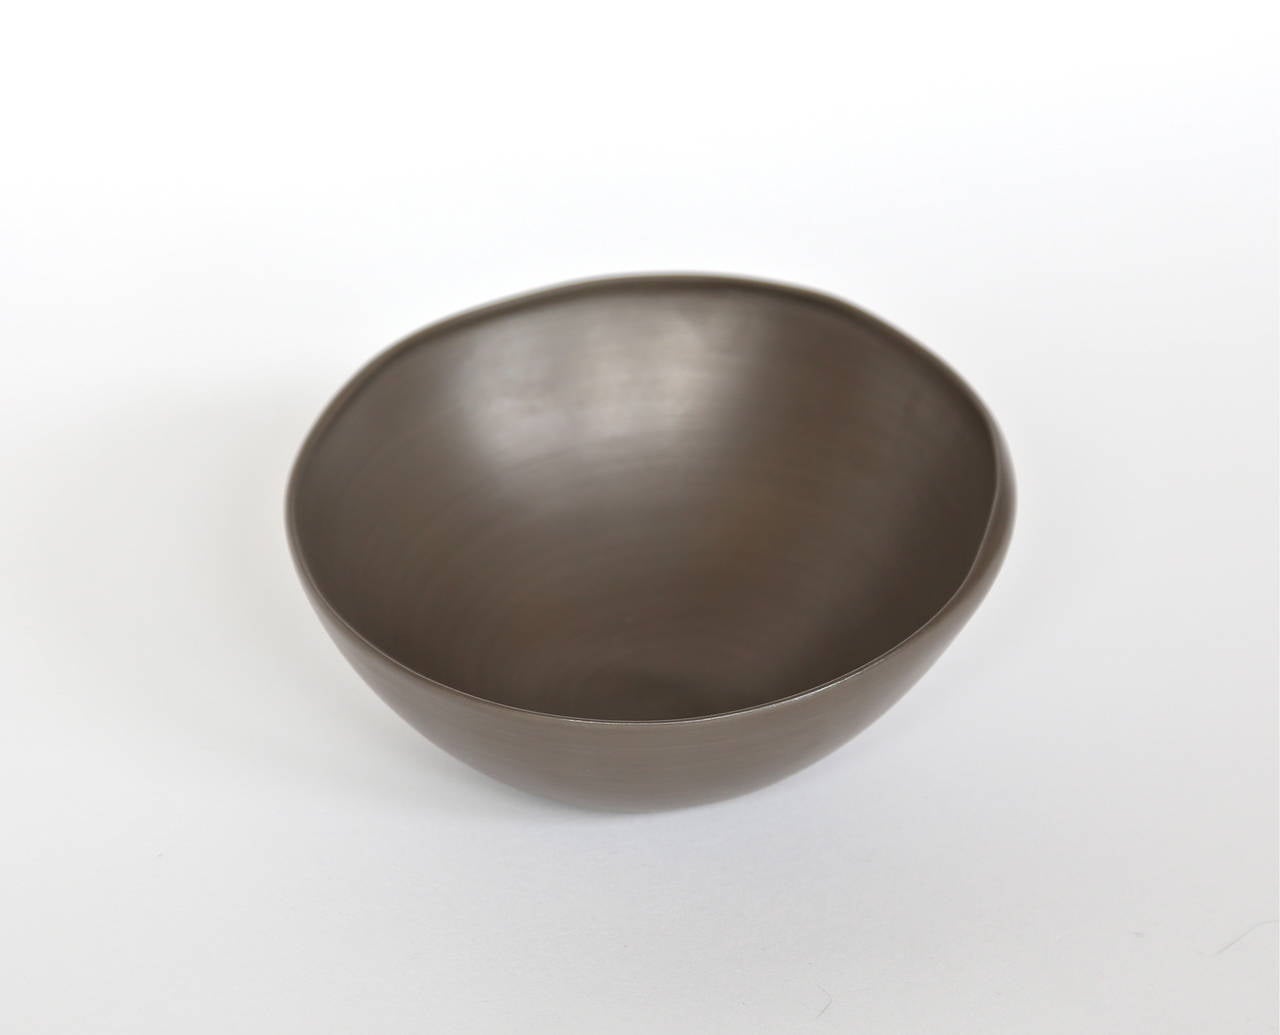 Italian handmade ceramic bowls in dark bronze, light and dark mauve by Rina Menardi. Can be ordered in many colors. Note: Light & dark mauve no longer available. Priced individually. Made to order. Shipping from Europe not included.

Measures: Mini: